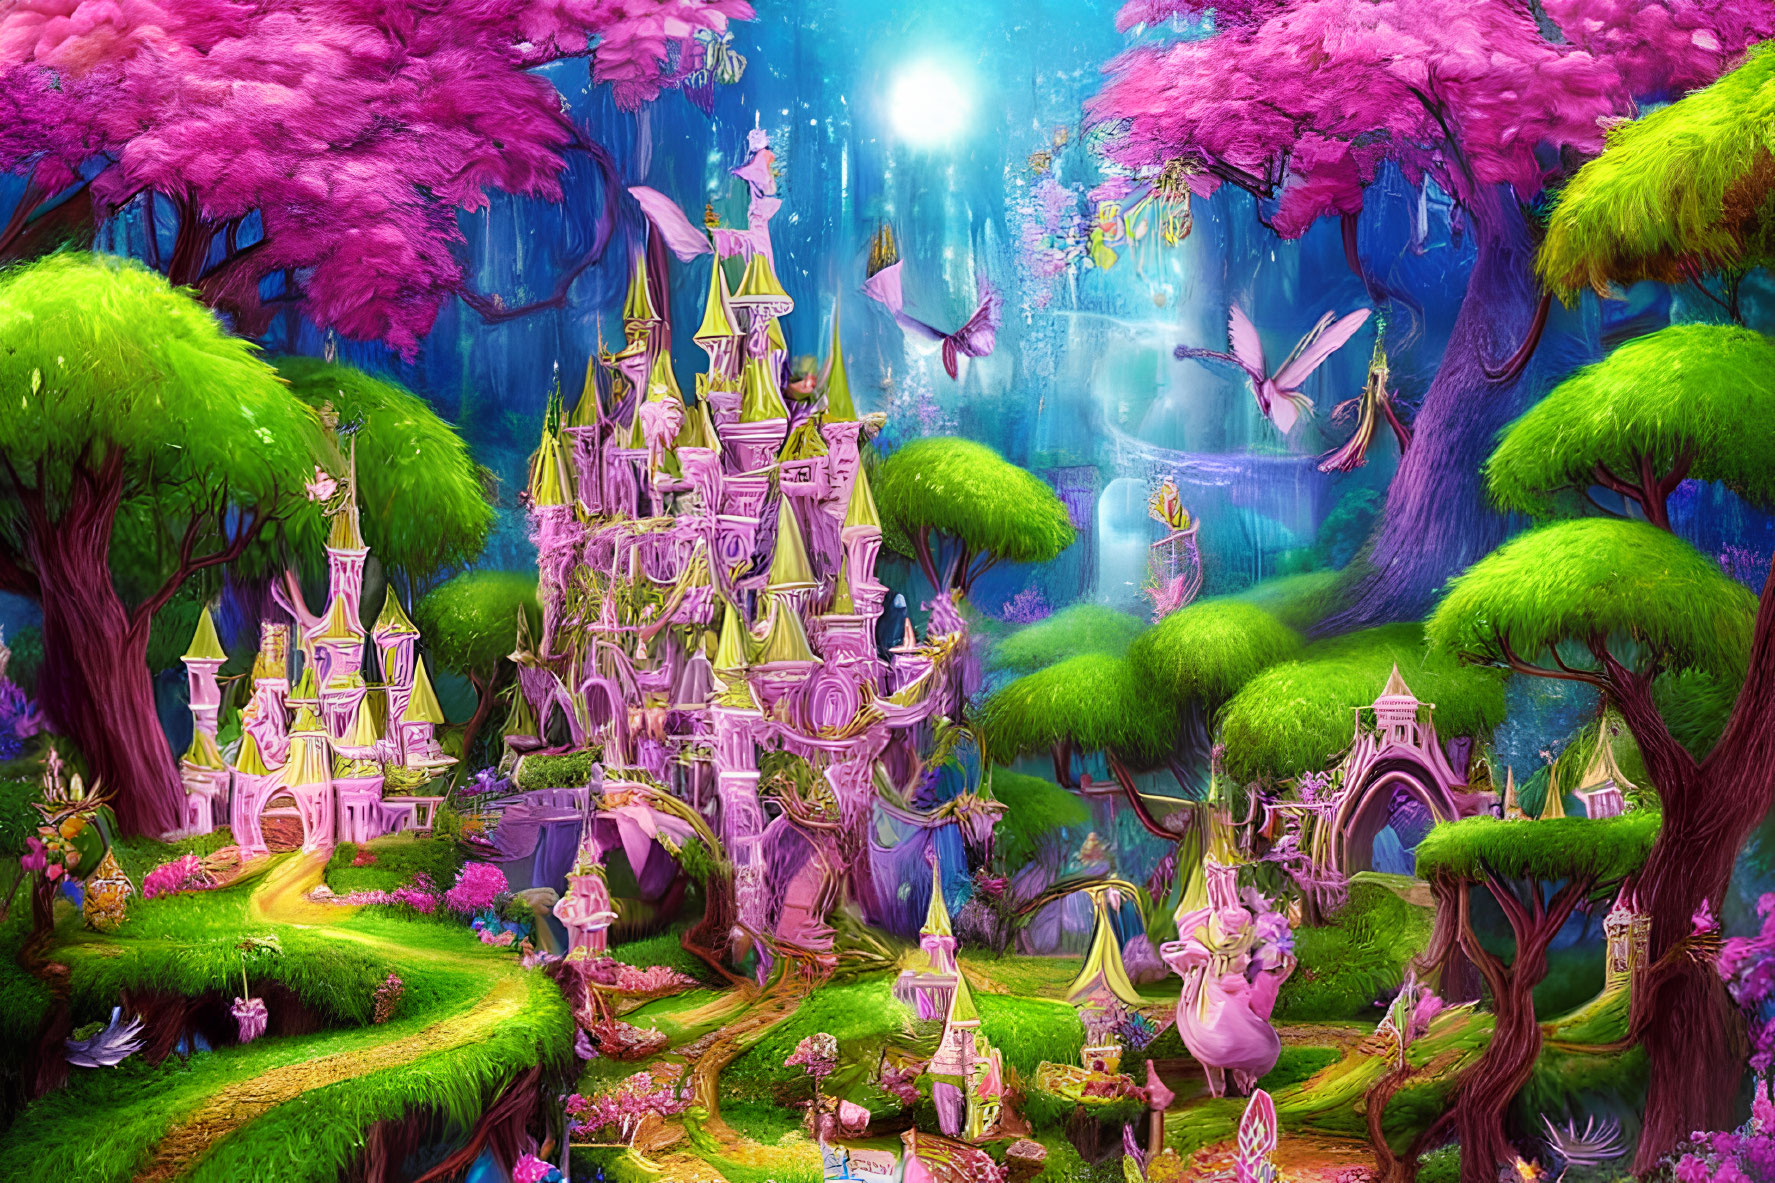 Fantasy landscape with castle, cherry blossoms, and flying creatures